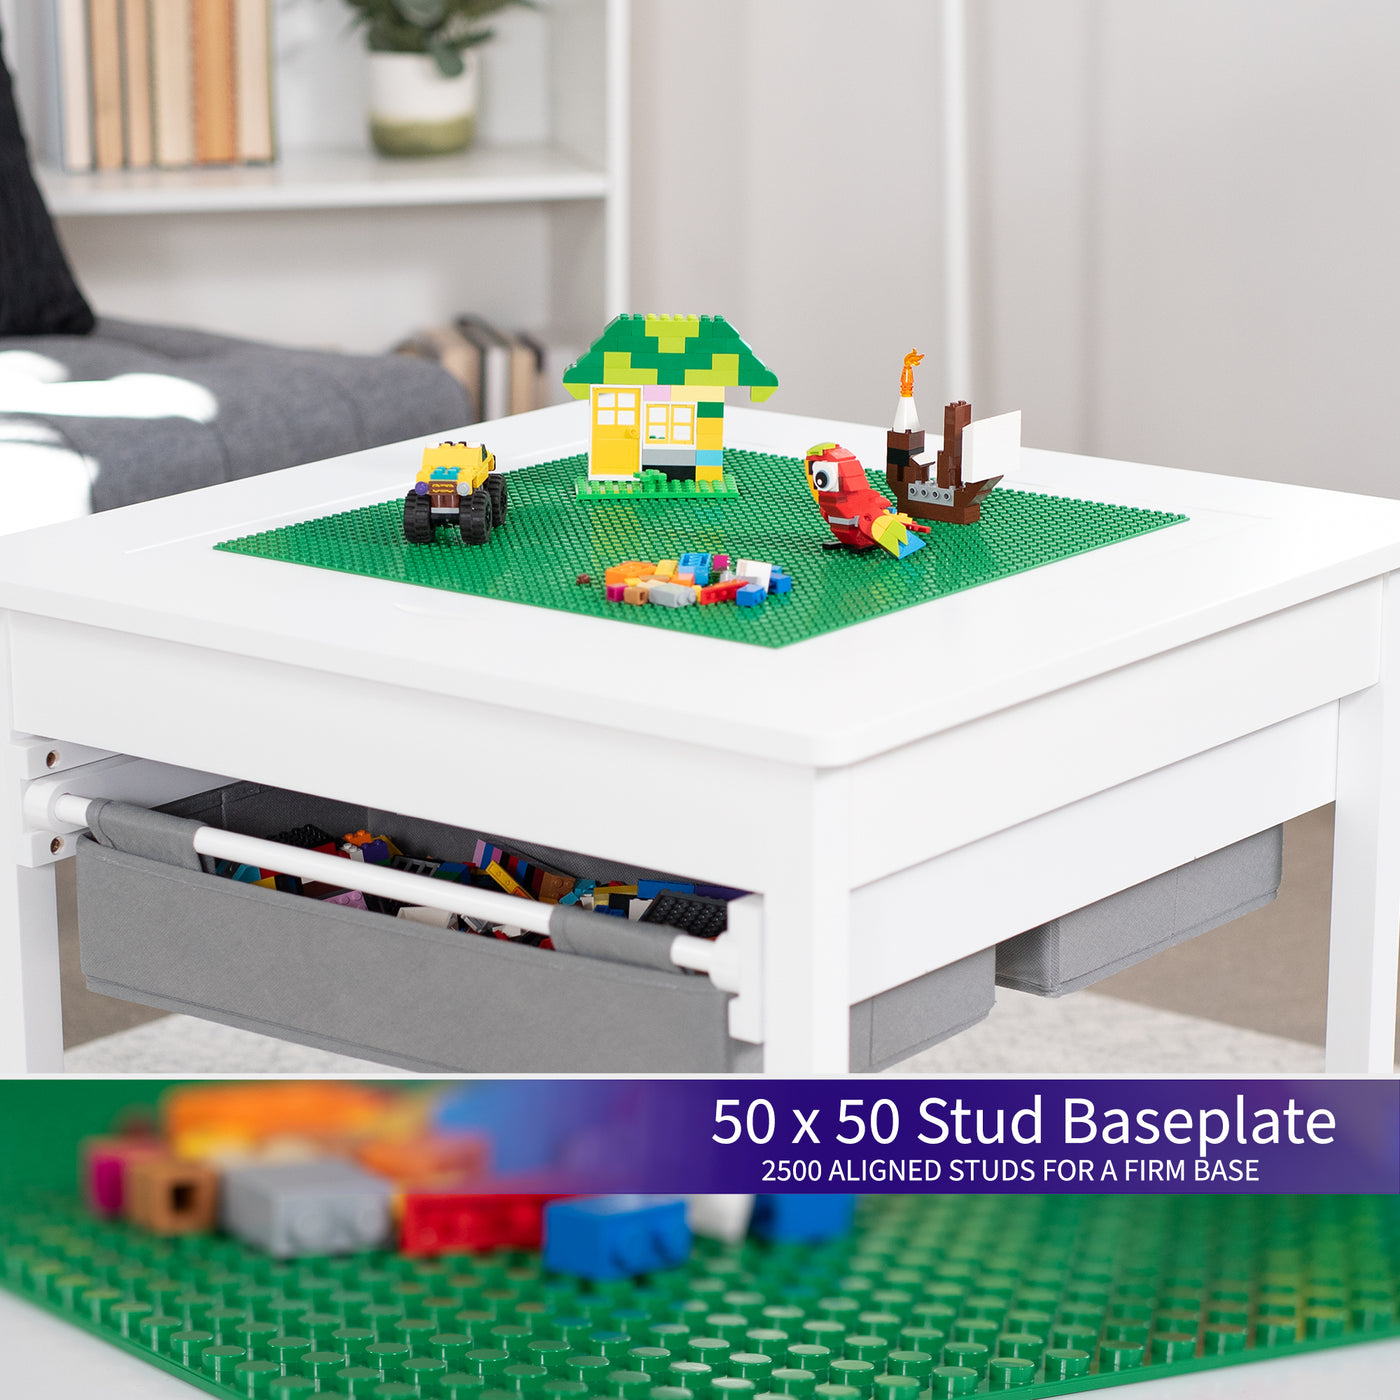 Kids' play table for Lego building bricks with reversible building base top and two pull-out drawers.